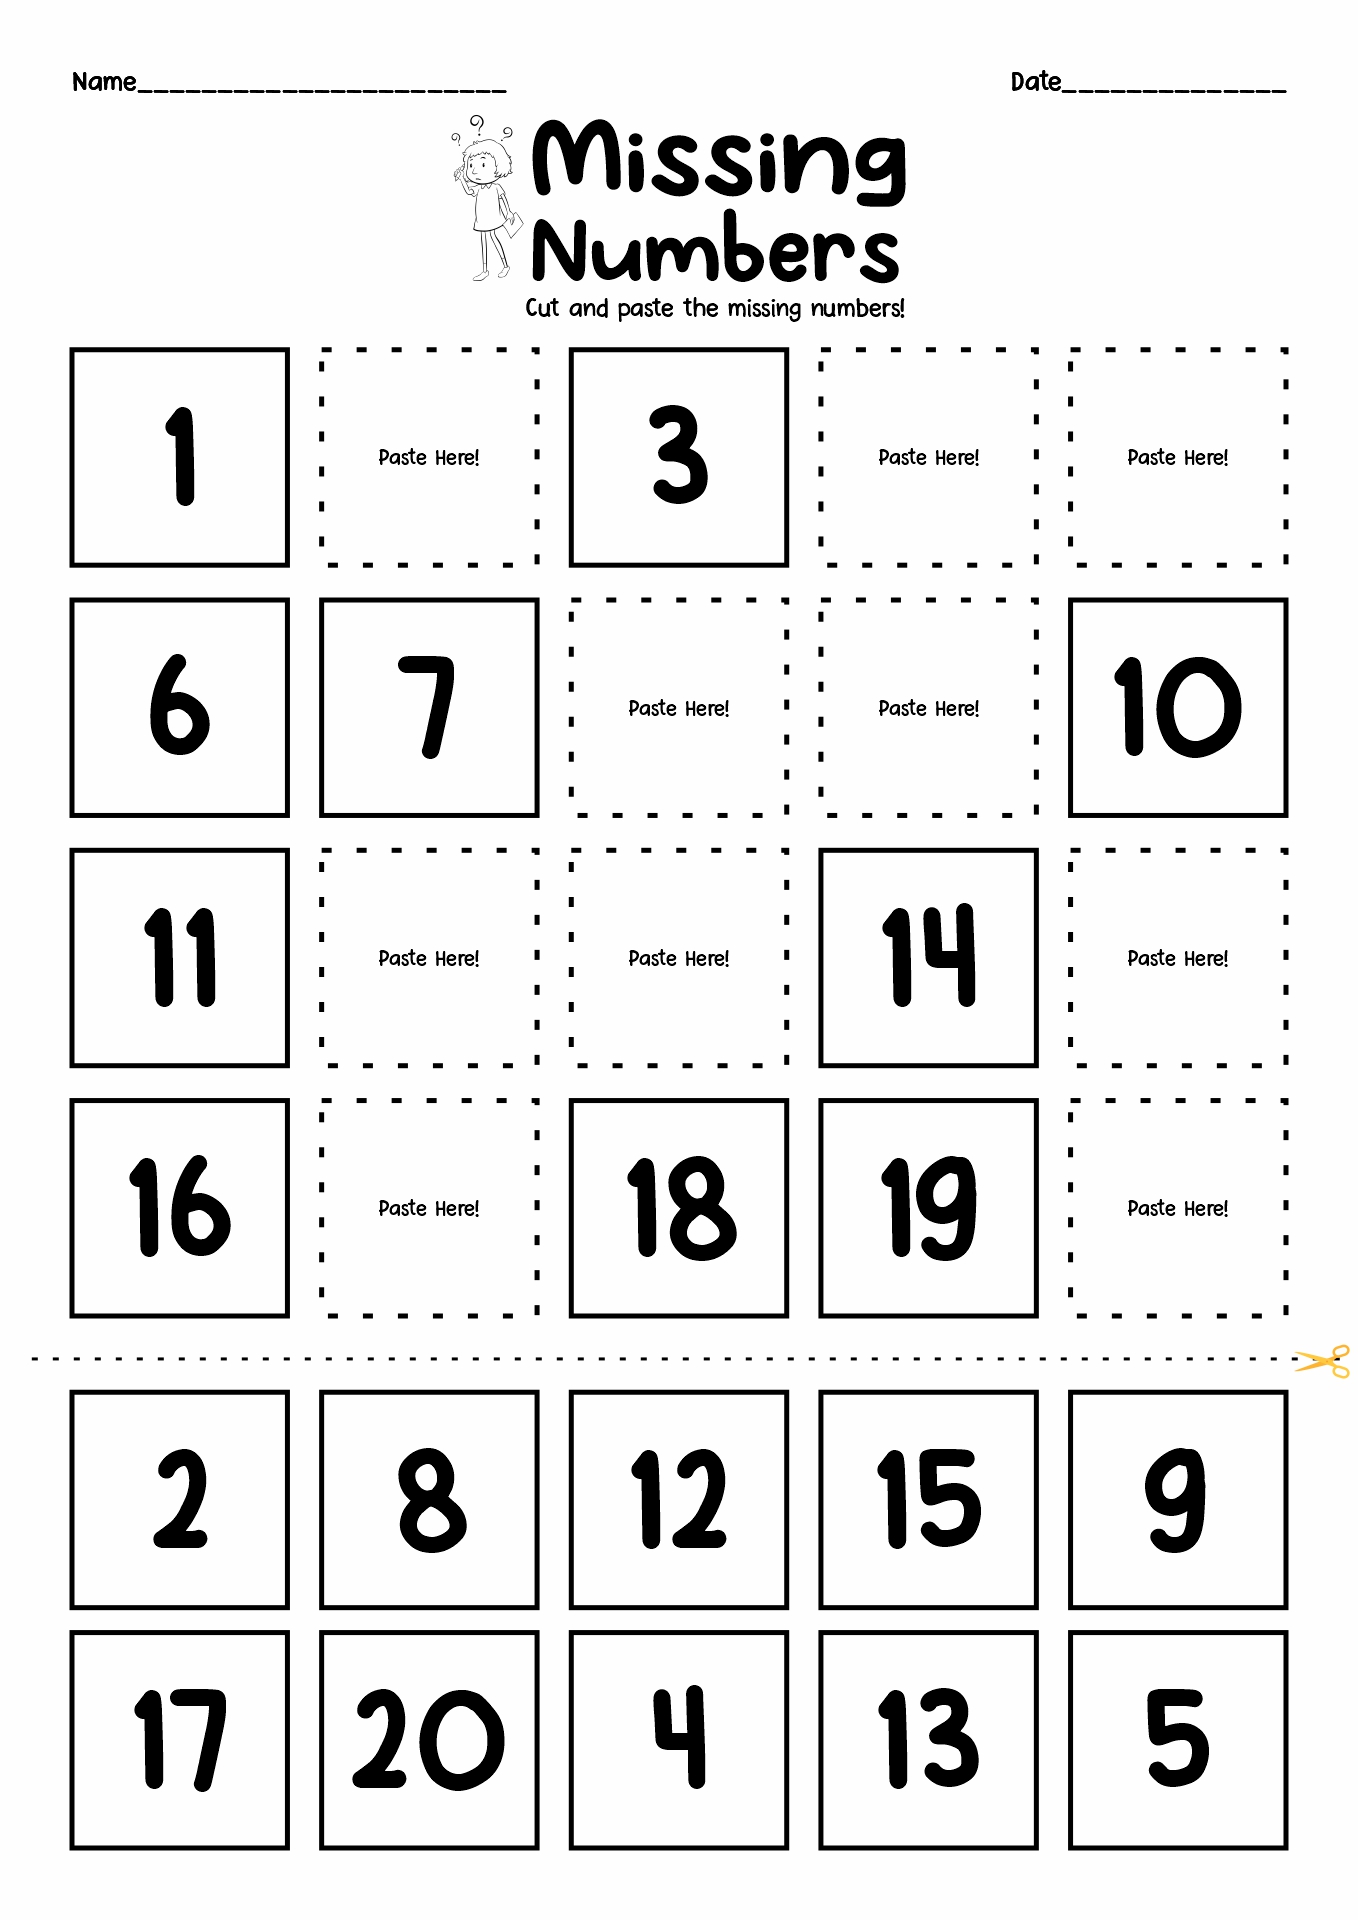 cut-and-paste-free-printables-free-printable-template